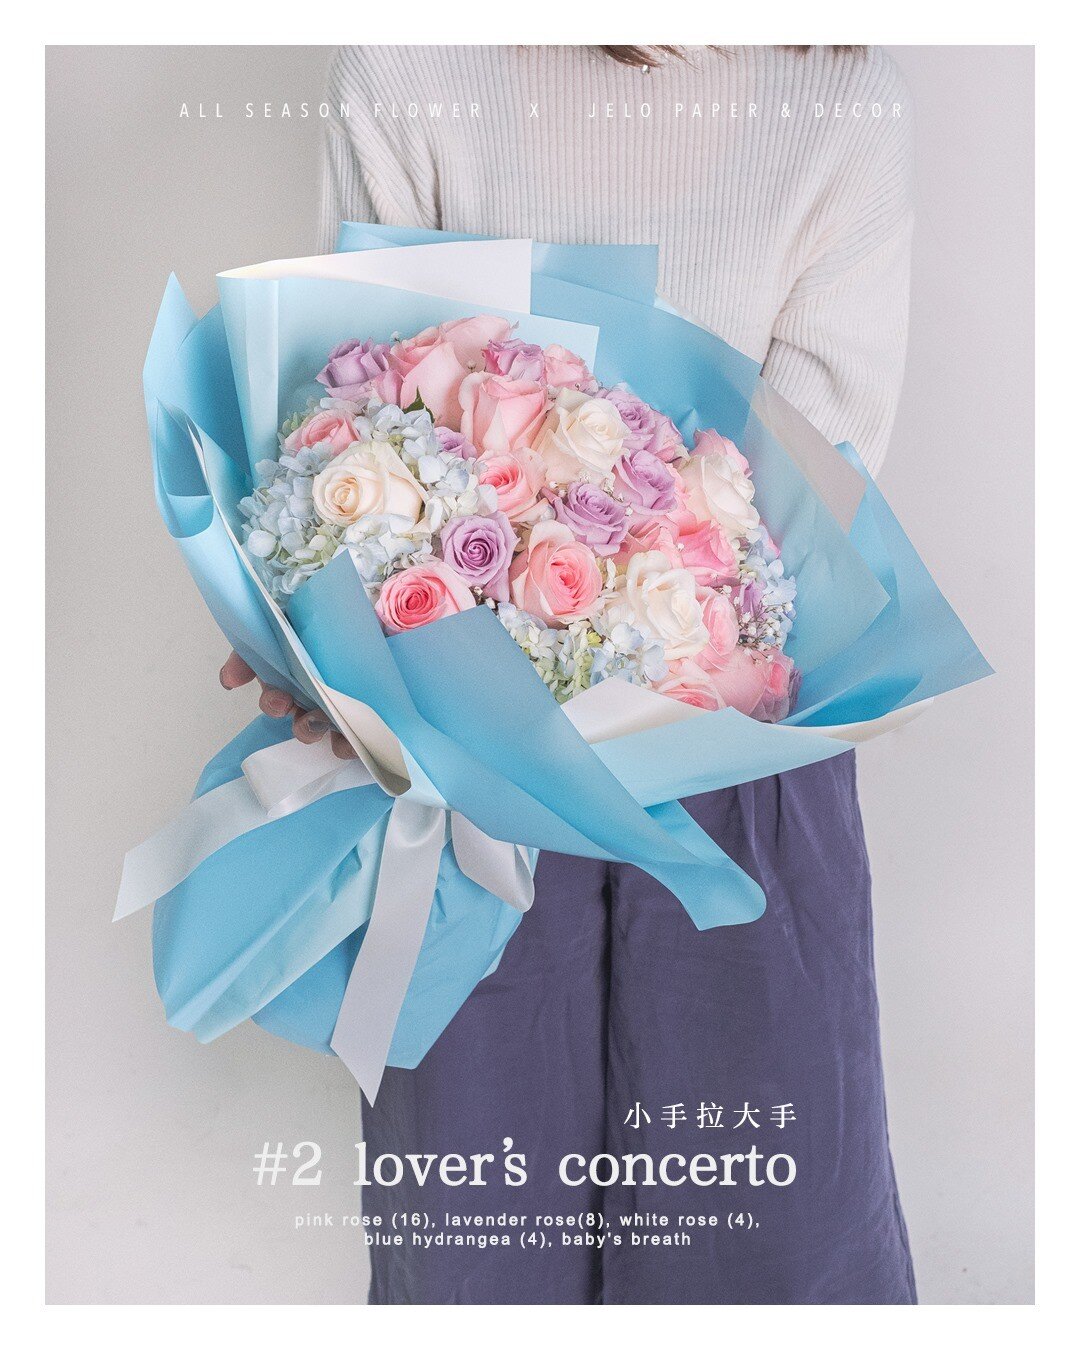 🌷 Valentine's flowers collection

#2 Lover's Concerto 
小手拉大手

15% off (1/4 - 1/25)

Free! Lyrics message card

How to order : 
Message us or Online order : 
www.allseasonflower.com/vday21

$12 Delivery flat rate to 5 boroughs
Free pick up in Brookly